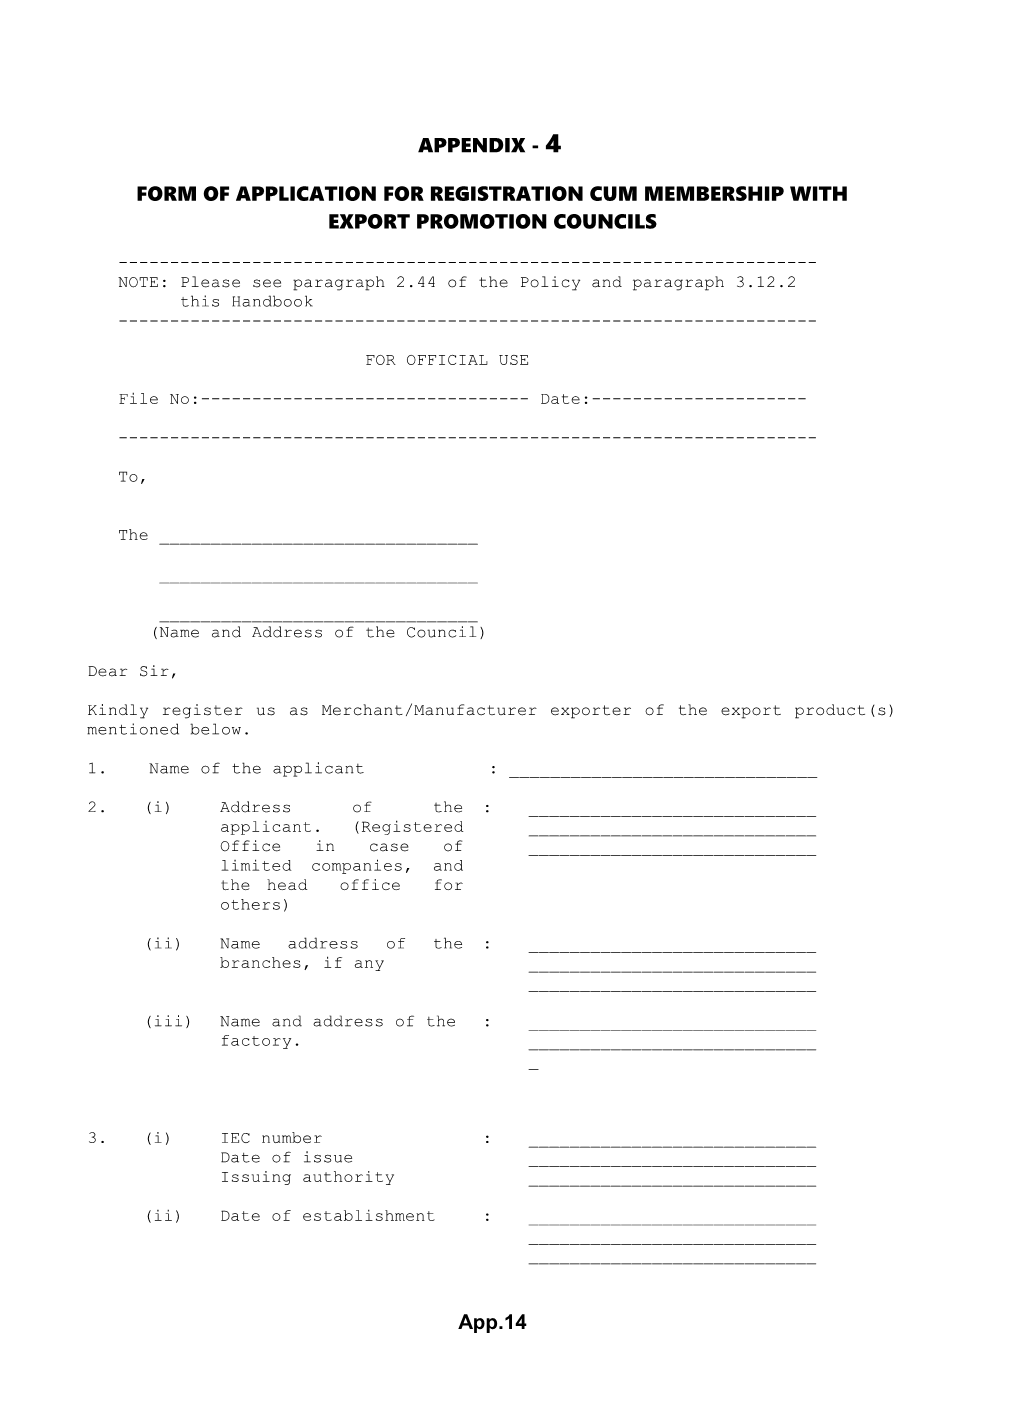 Form of Application for Registration Cum Membership With